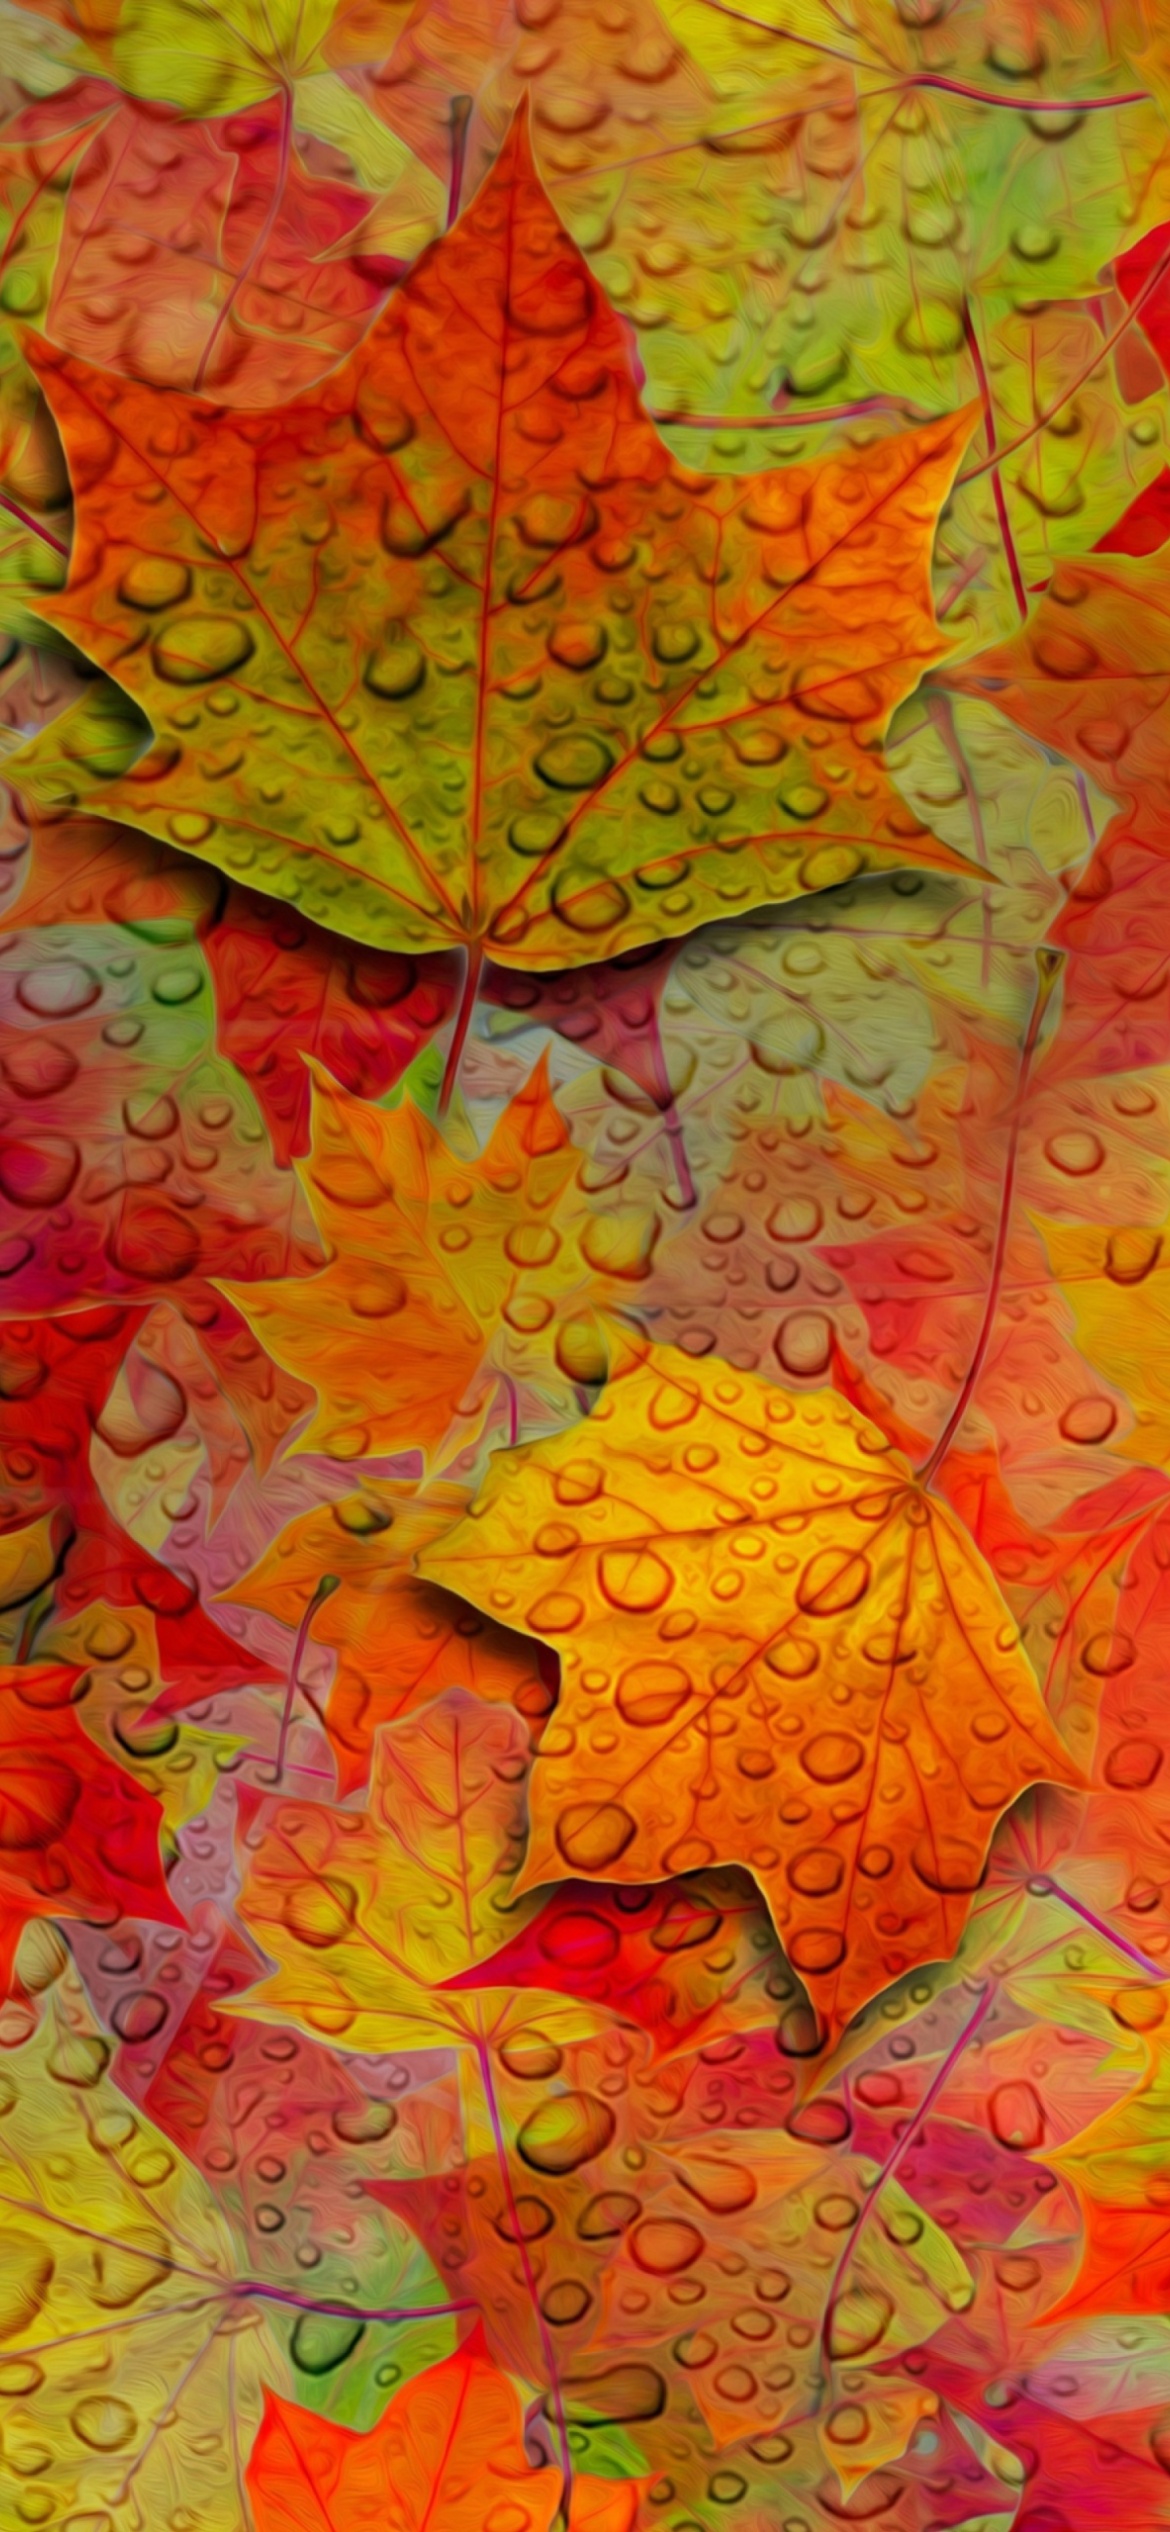 Abstract Fall Leaves wallpaper 1170x2532